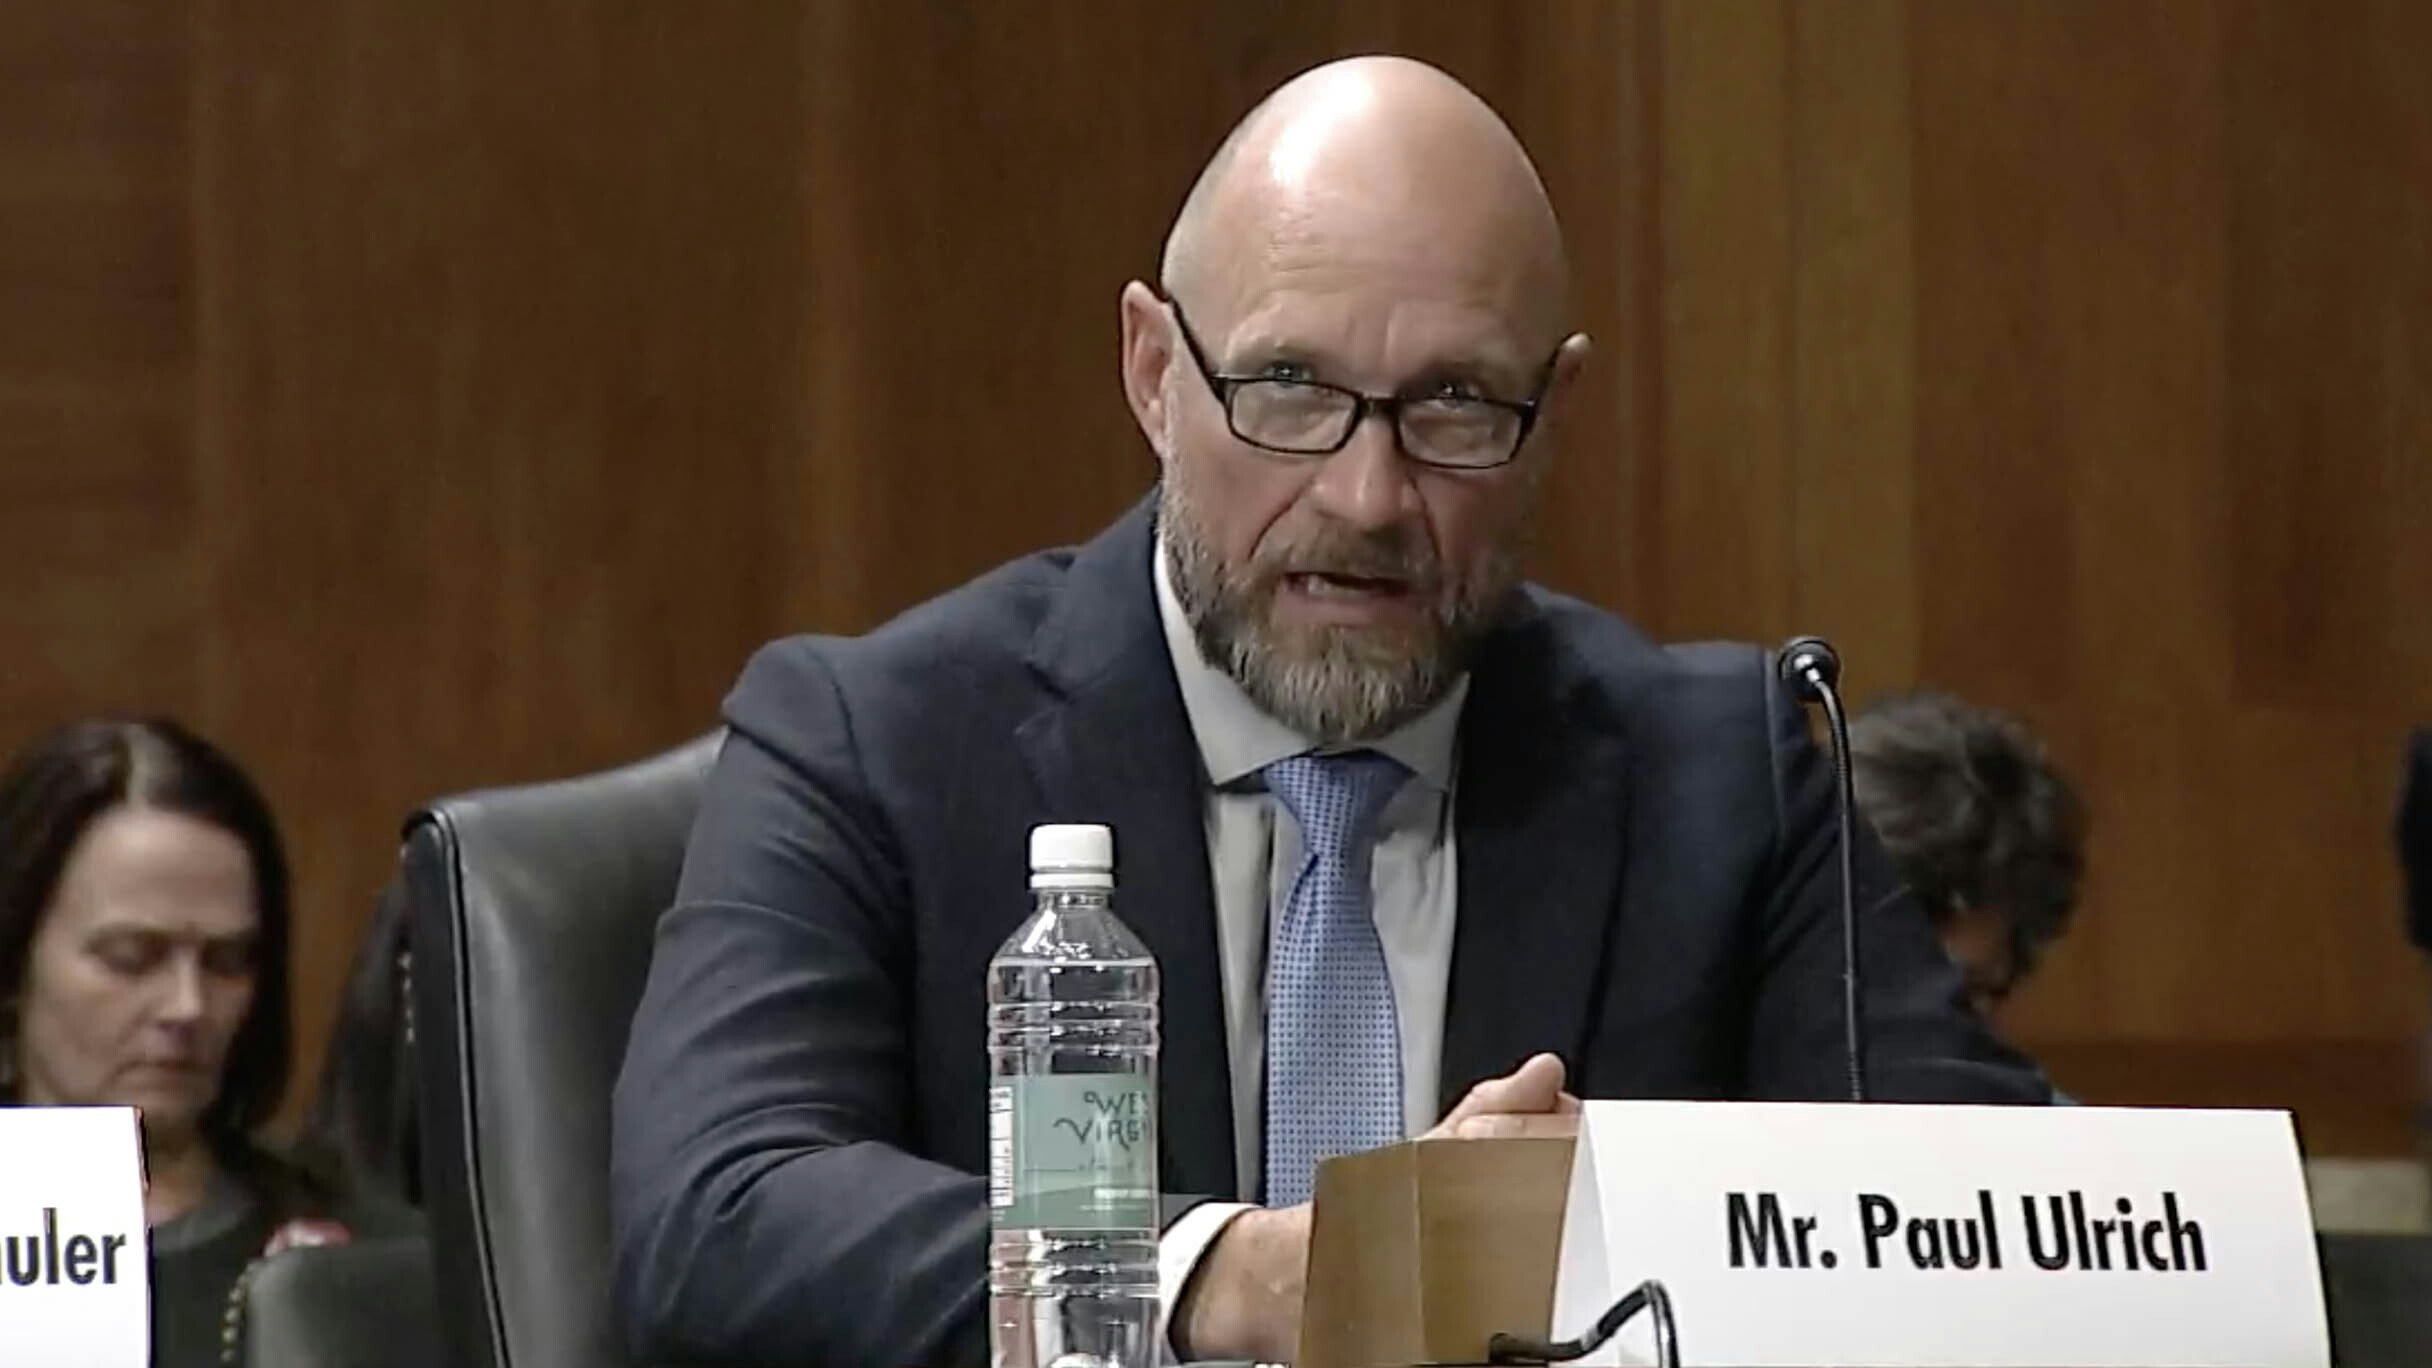 Paul Ulrich, noted Wyoming outdoorsman and vice president of Jonah Energy, testified last week to the Senate Committee on Energy and Natural Resources in Washington, DC